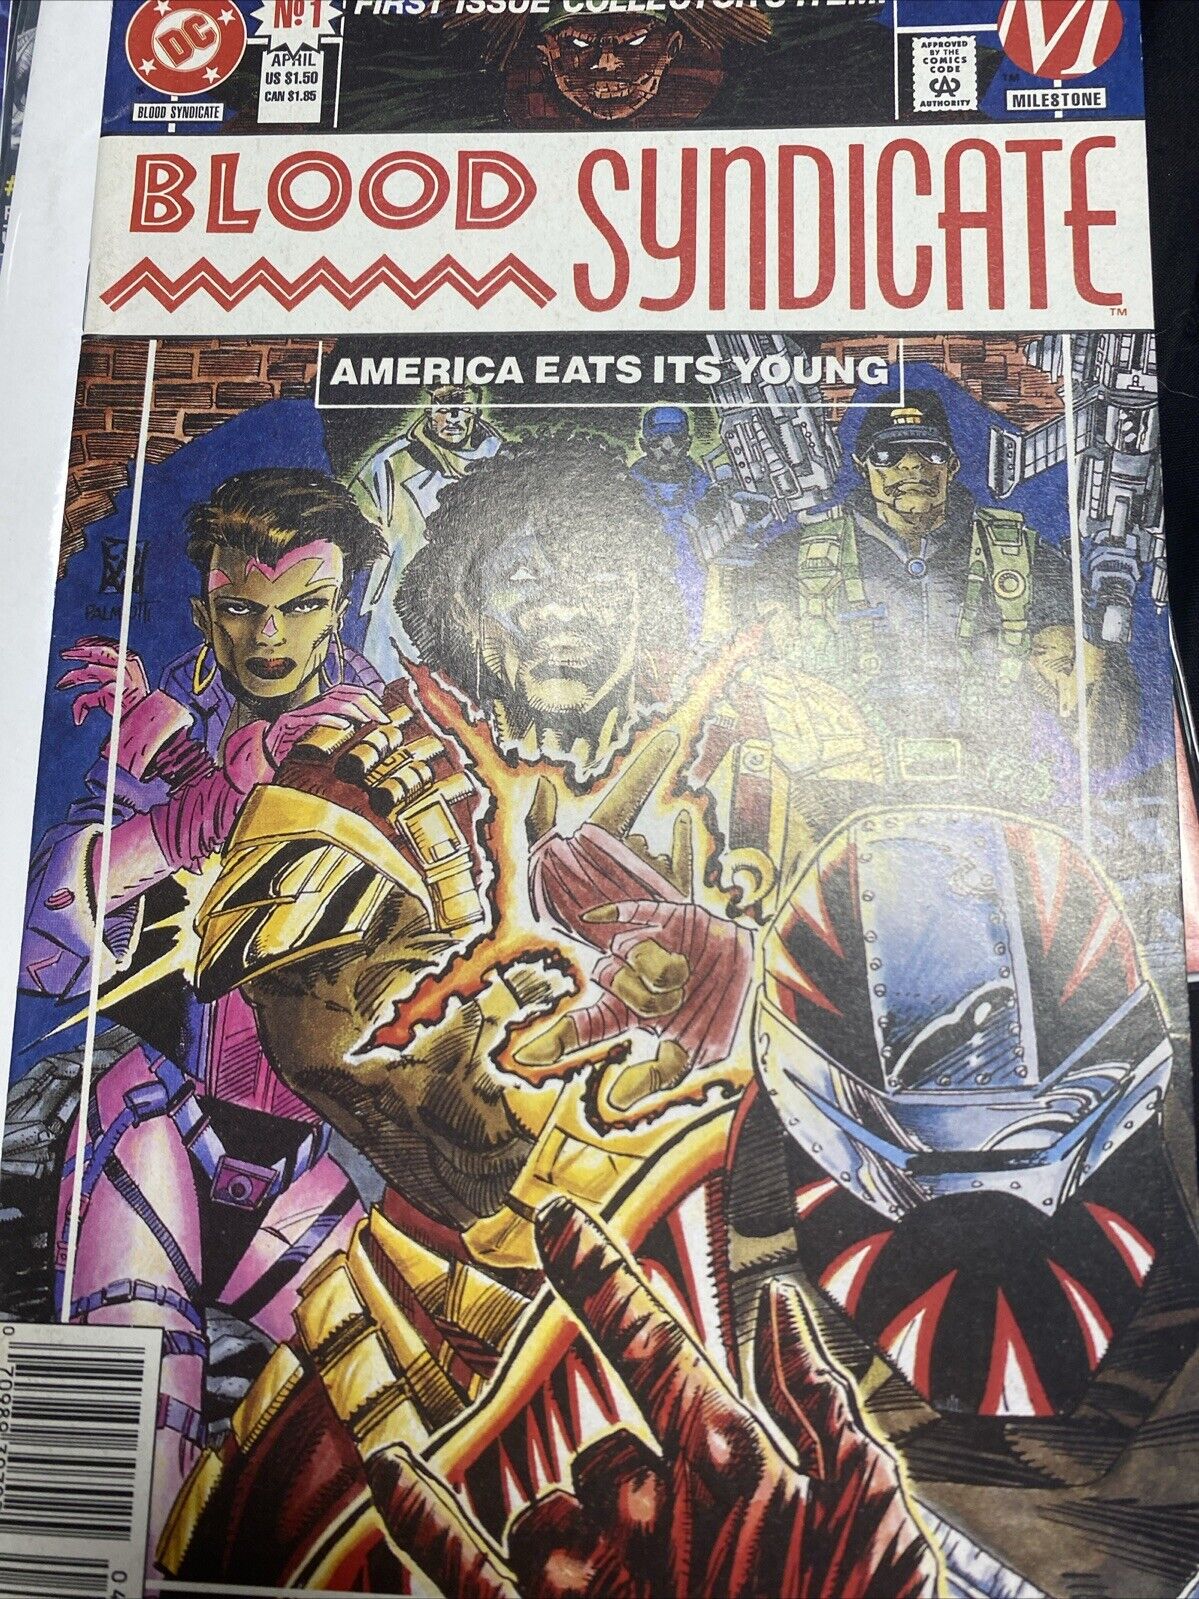 DC MILESTONE COMICS BLOOD SYNDICATE #1 FIRST ISSUE COLLECTOR'S ITEM